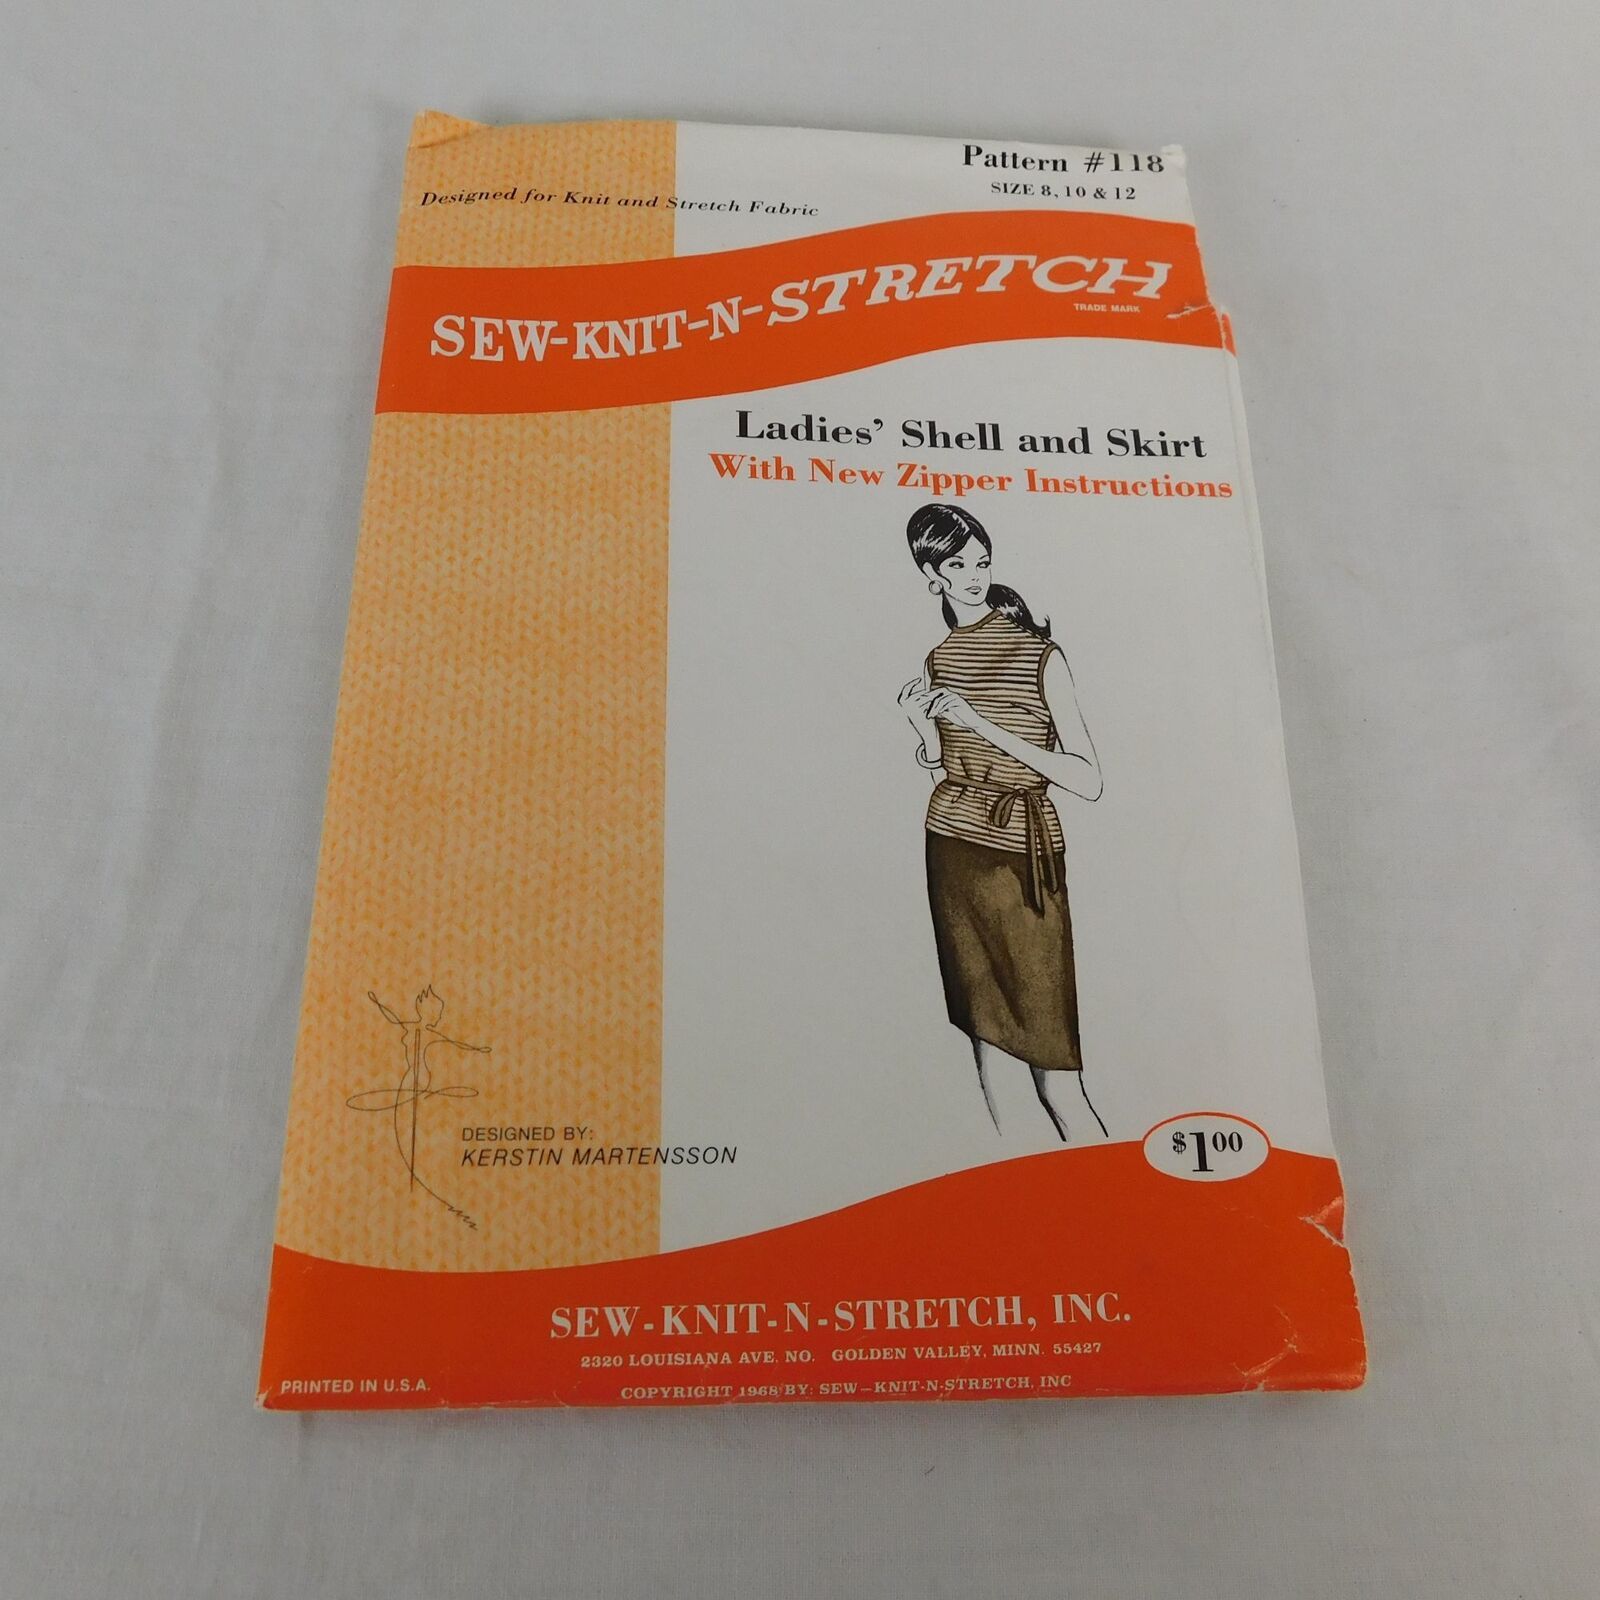 Sew-Knit-N-Stretch Sewing Pattern 118 Ladies Shell Skirt Sizes 8-12 CUT Size 12 - $5.00